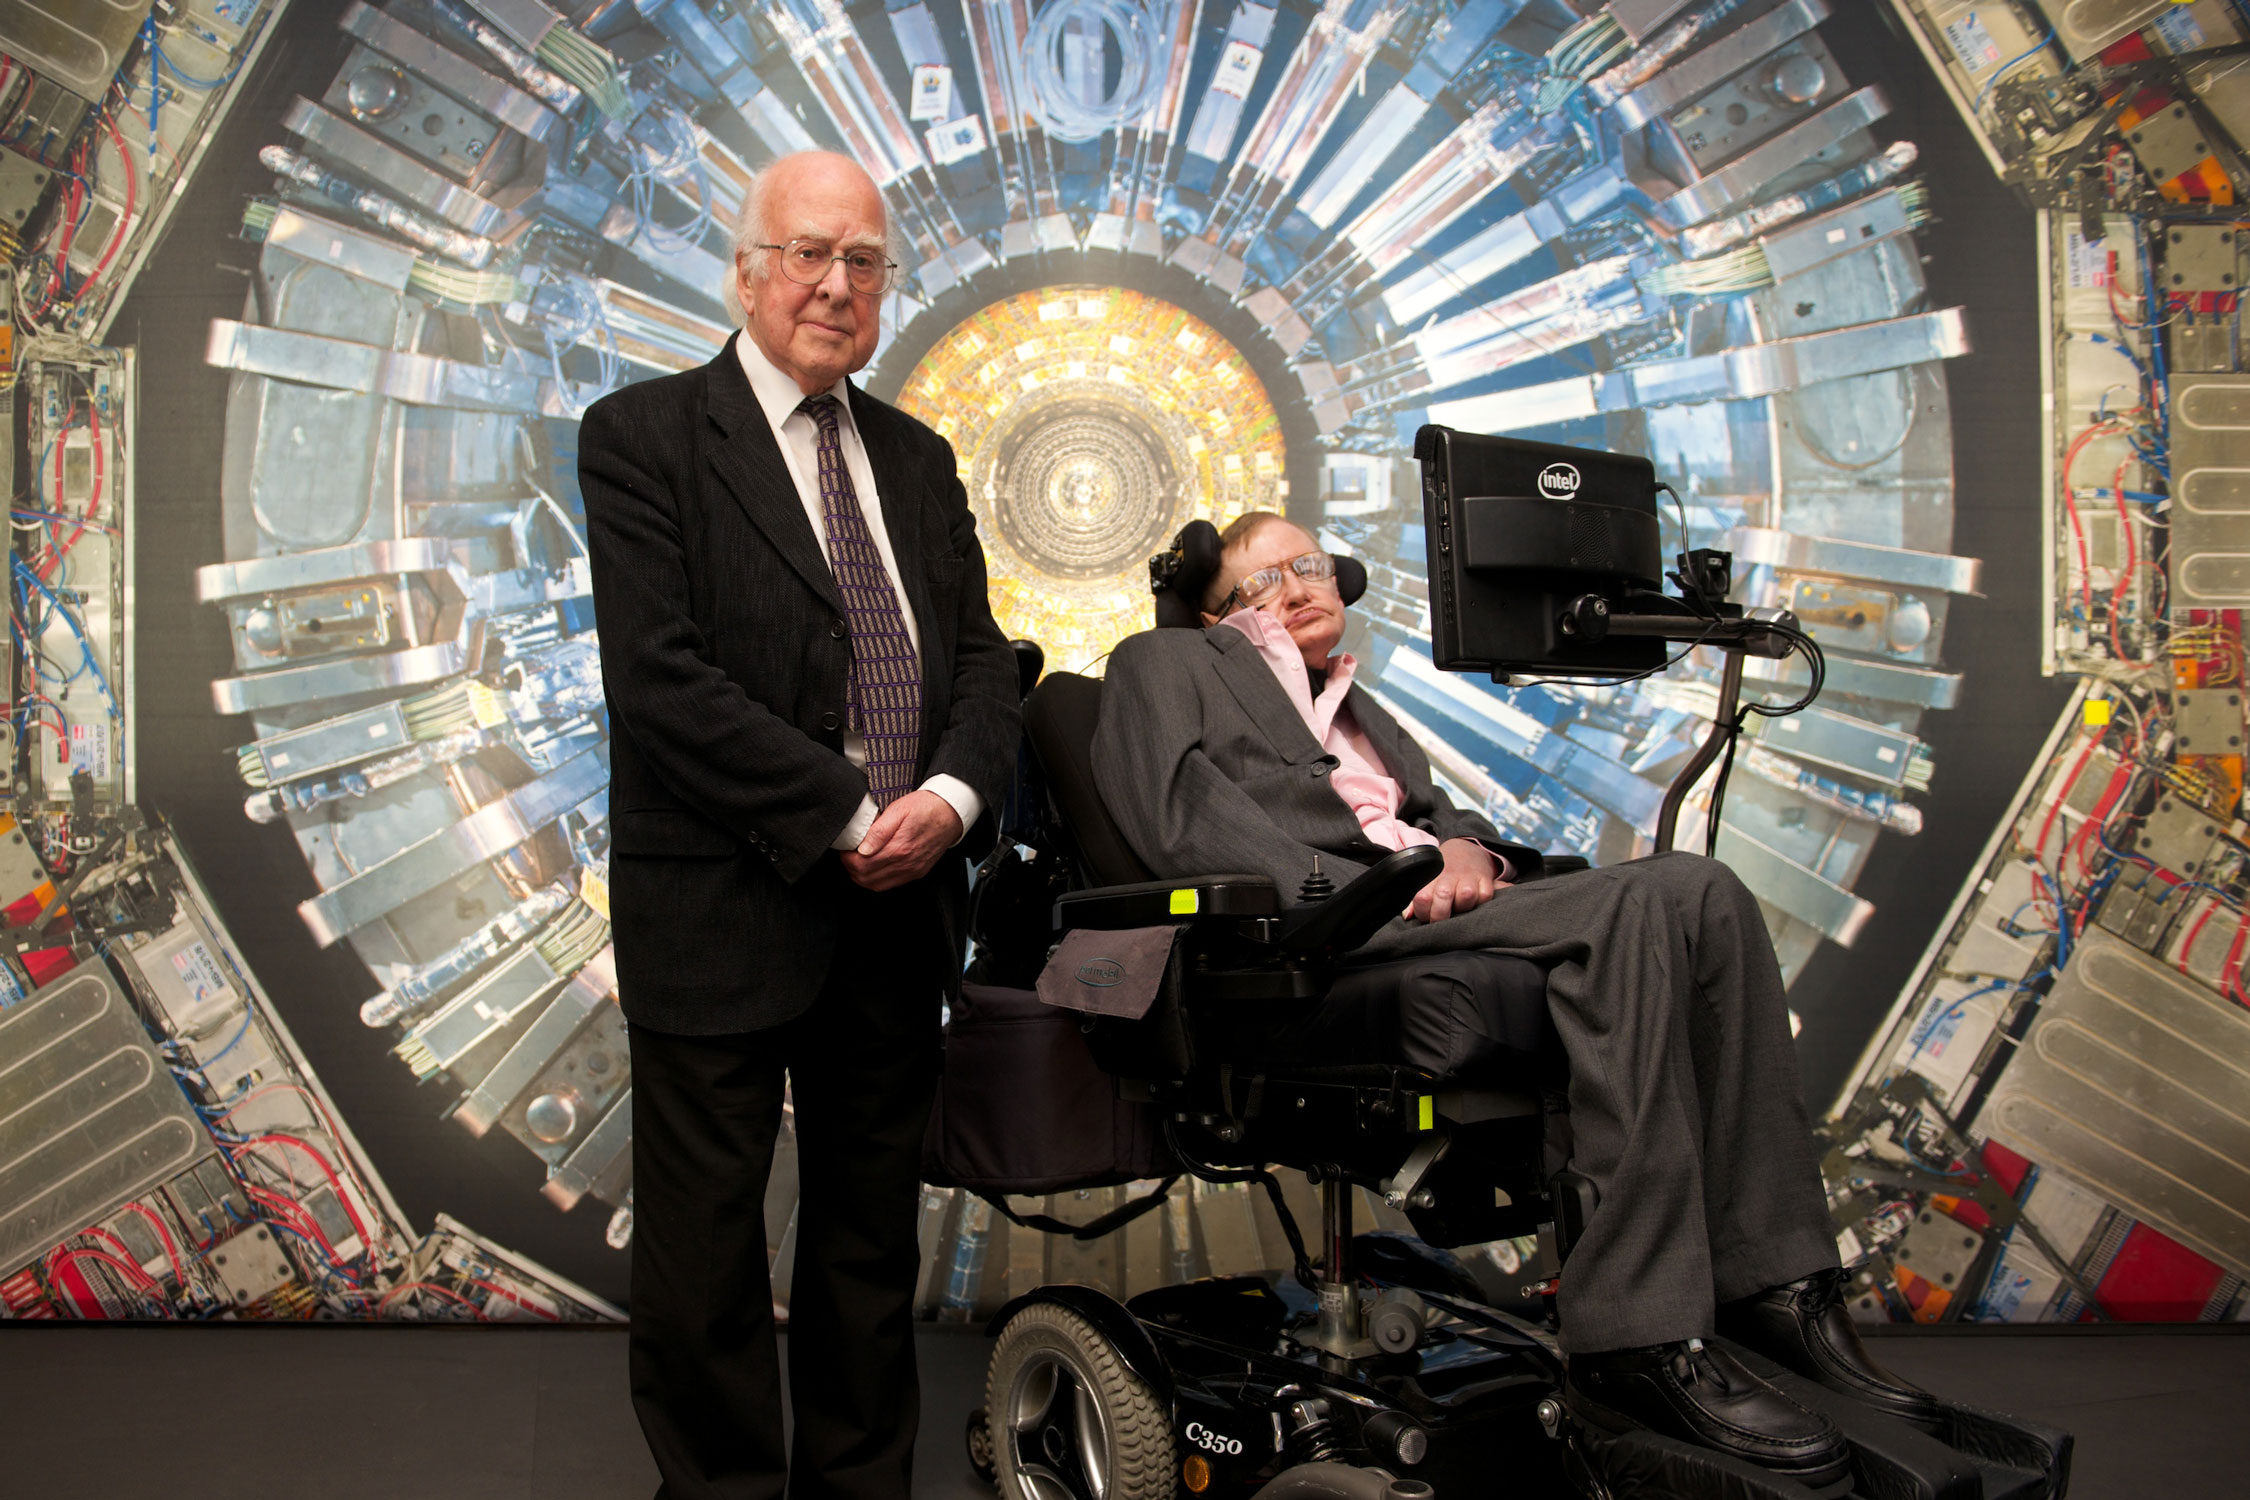 Peter Higgs and Stephen Hawking in the Collider exhibition.